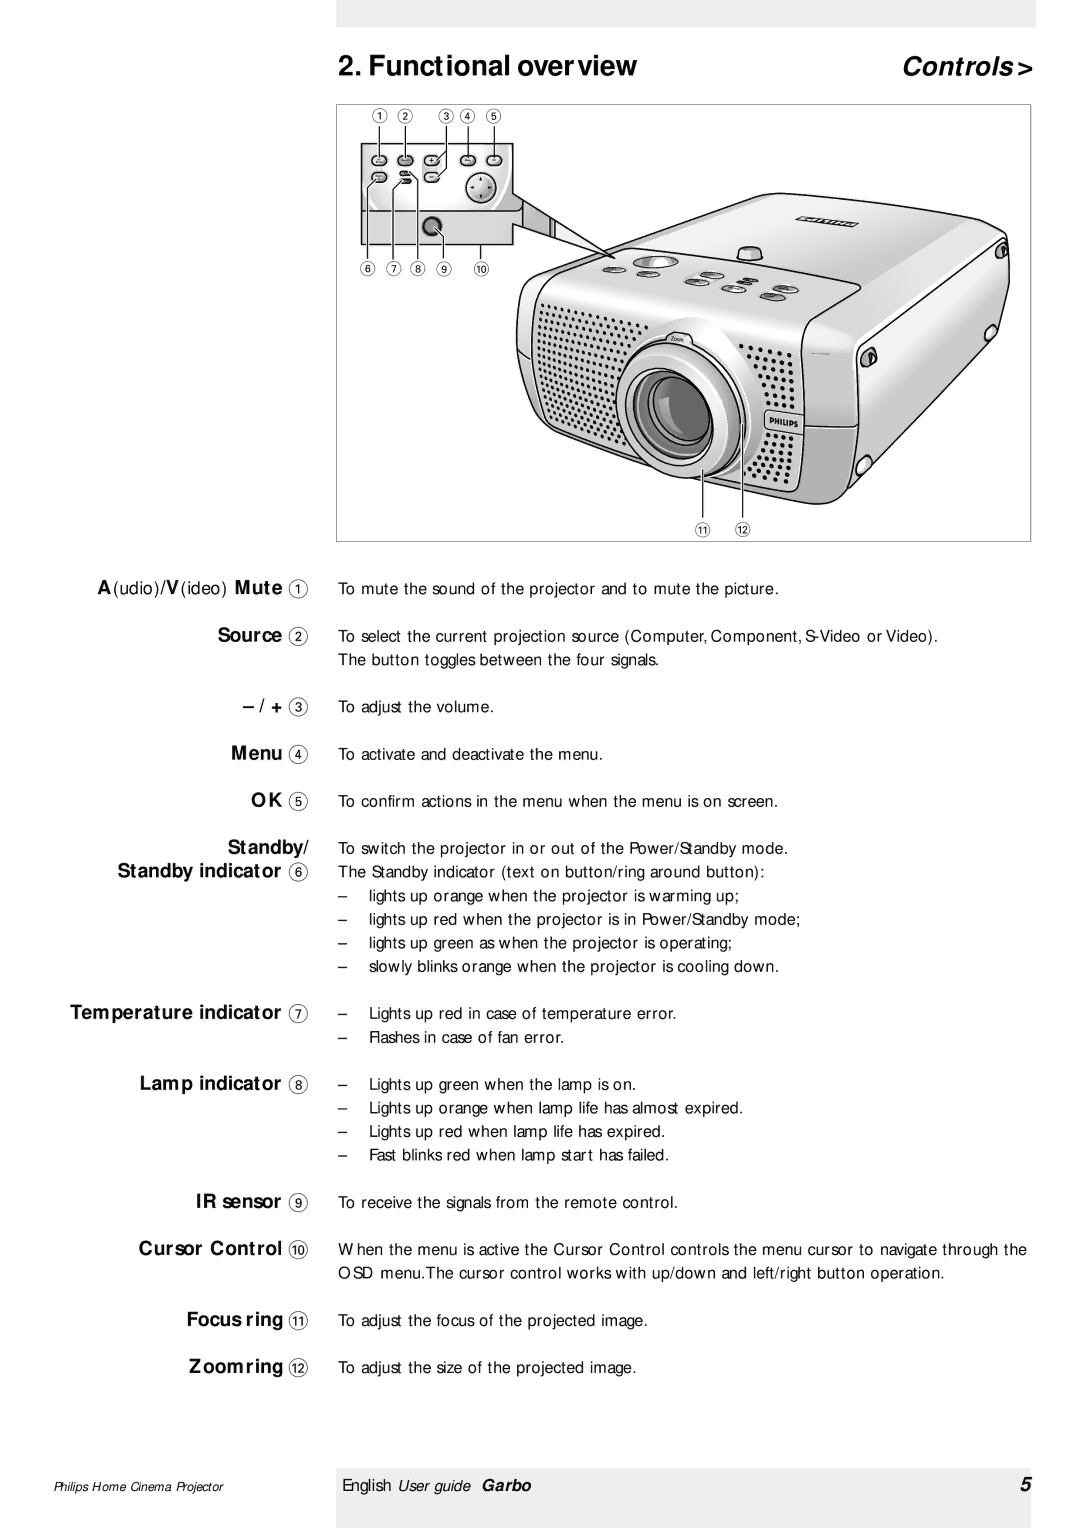 Philips Garbo manual Functional overview, Source + 3 Menu Standby/ Standby indicator 